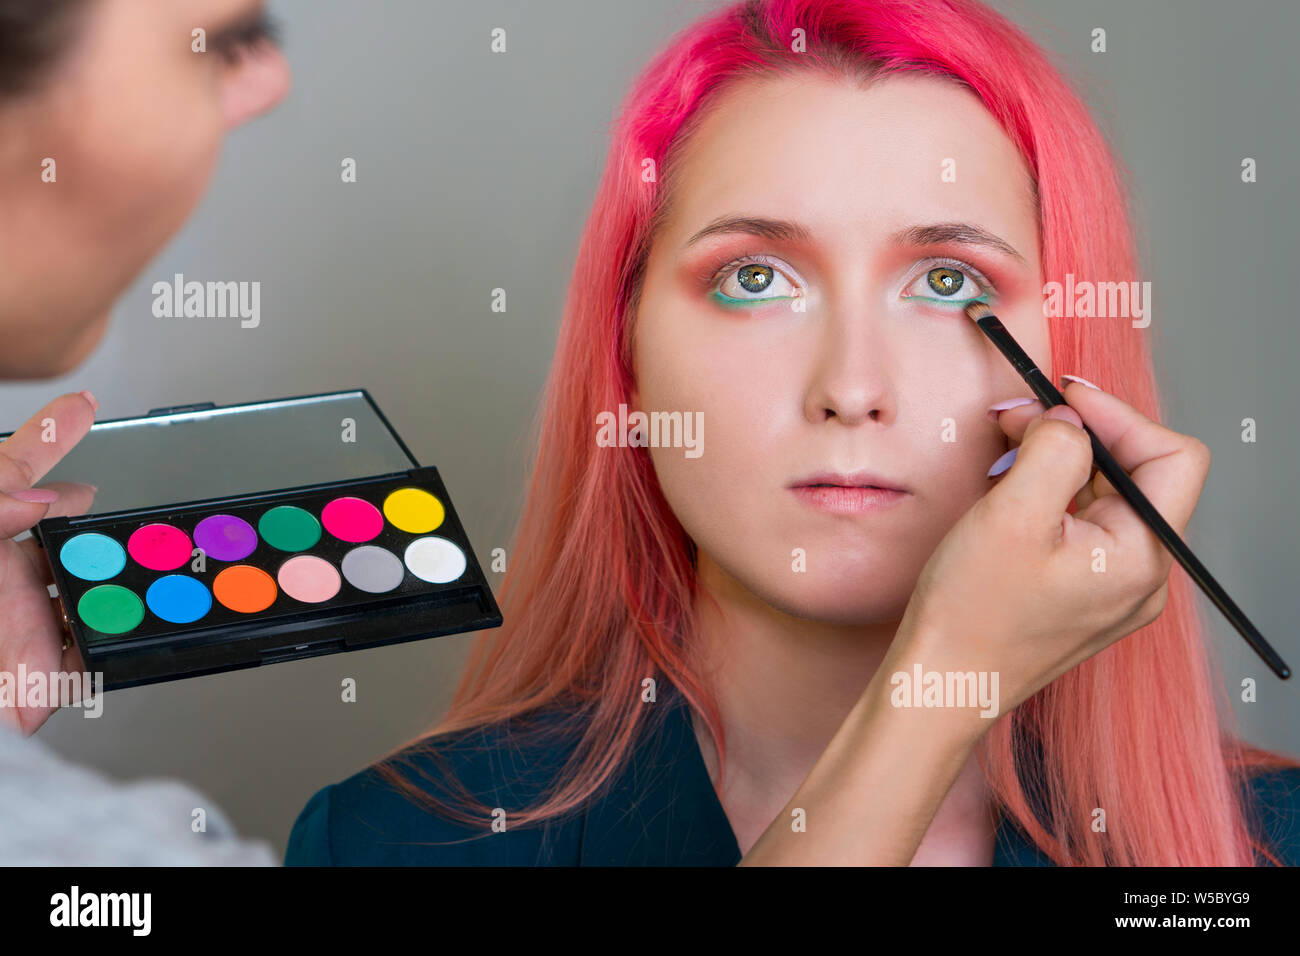 Professional makeup. Perfect skin. Beauty fashion model girl creative art  makeup. Trendy color modern stylish hairstyle. Ombre with purple hair.  Sweet Stock Photo - Alamy